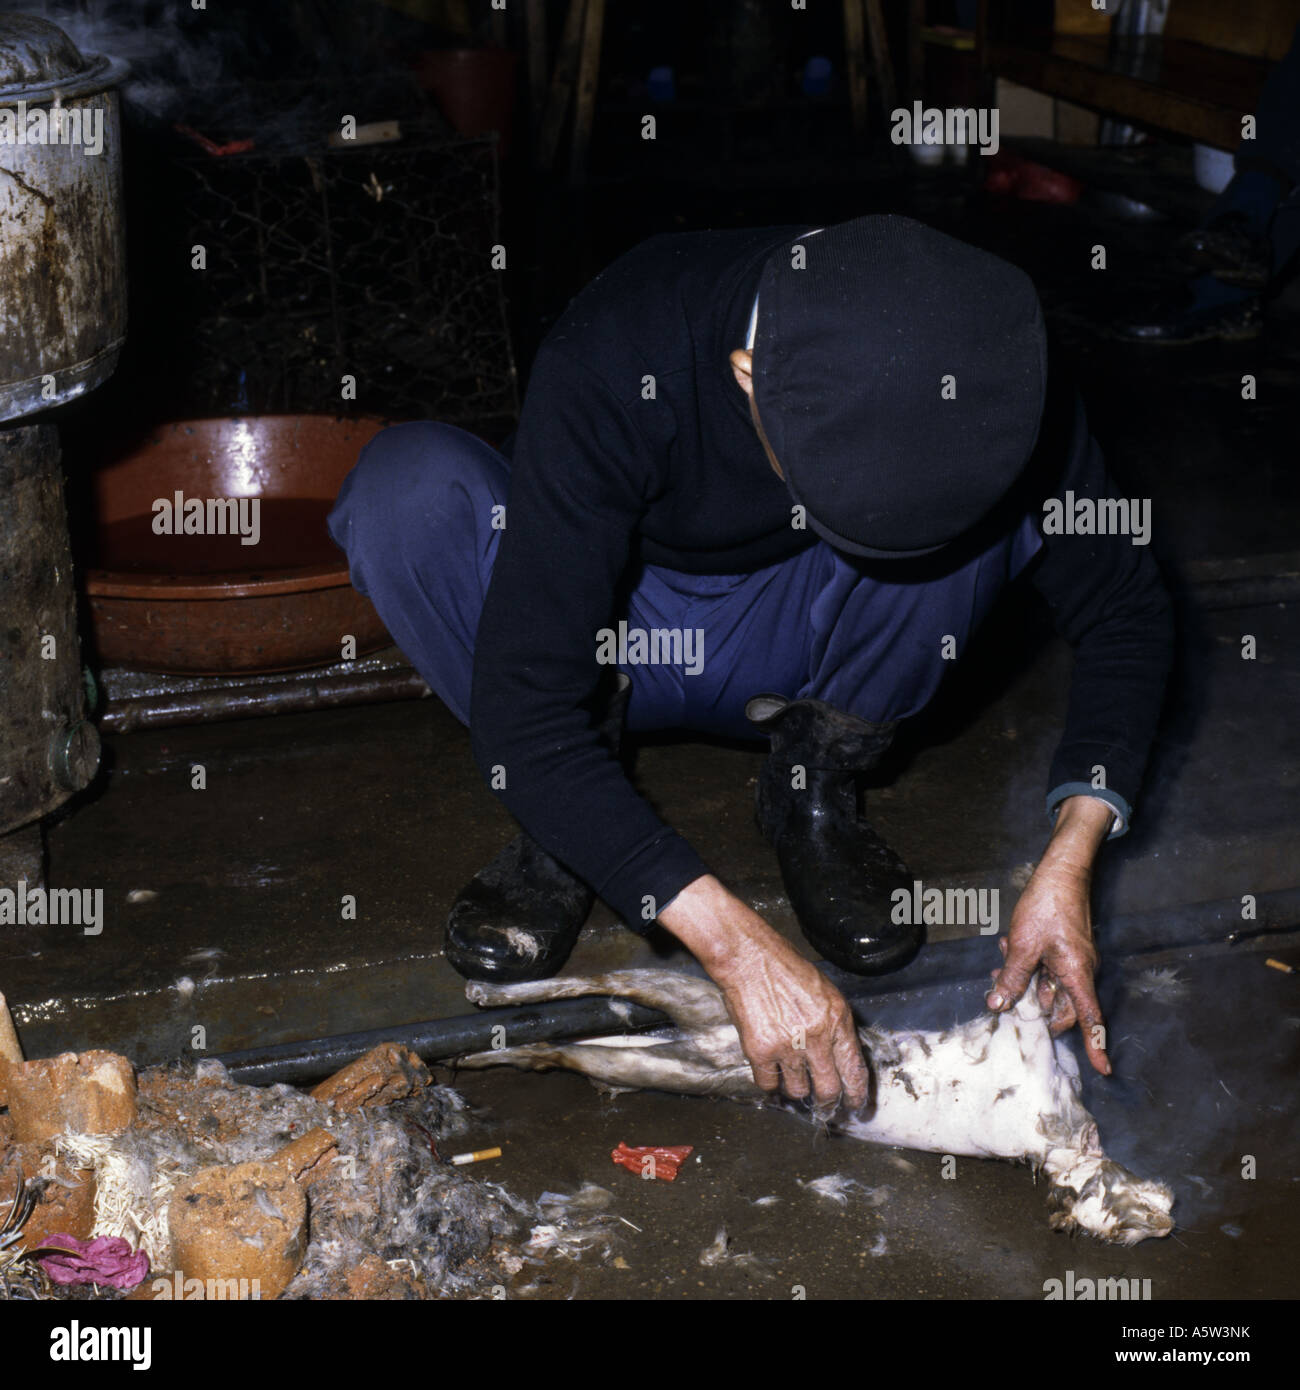 Local man removes last of fur from cat after killing and boiling,ordered by customer for food,Yangshuo,Guangxi Province,China. Stock Photo